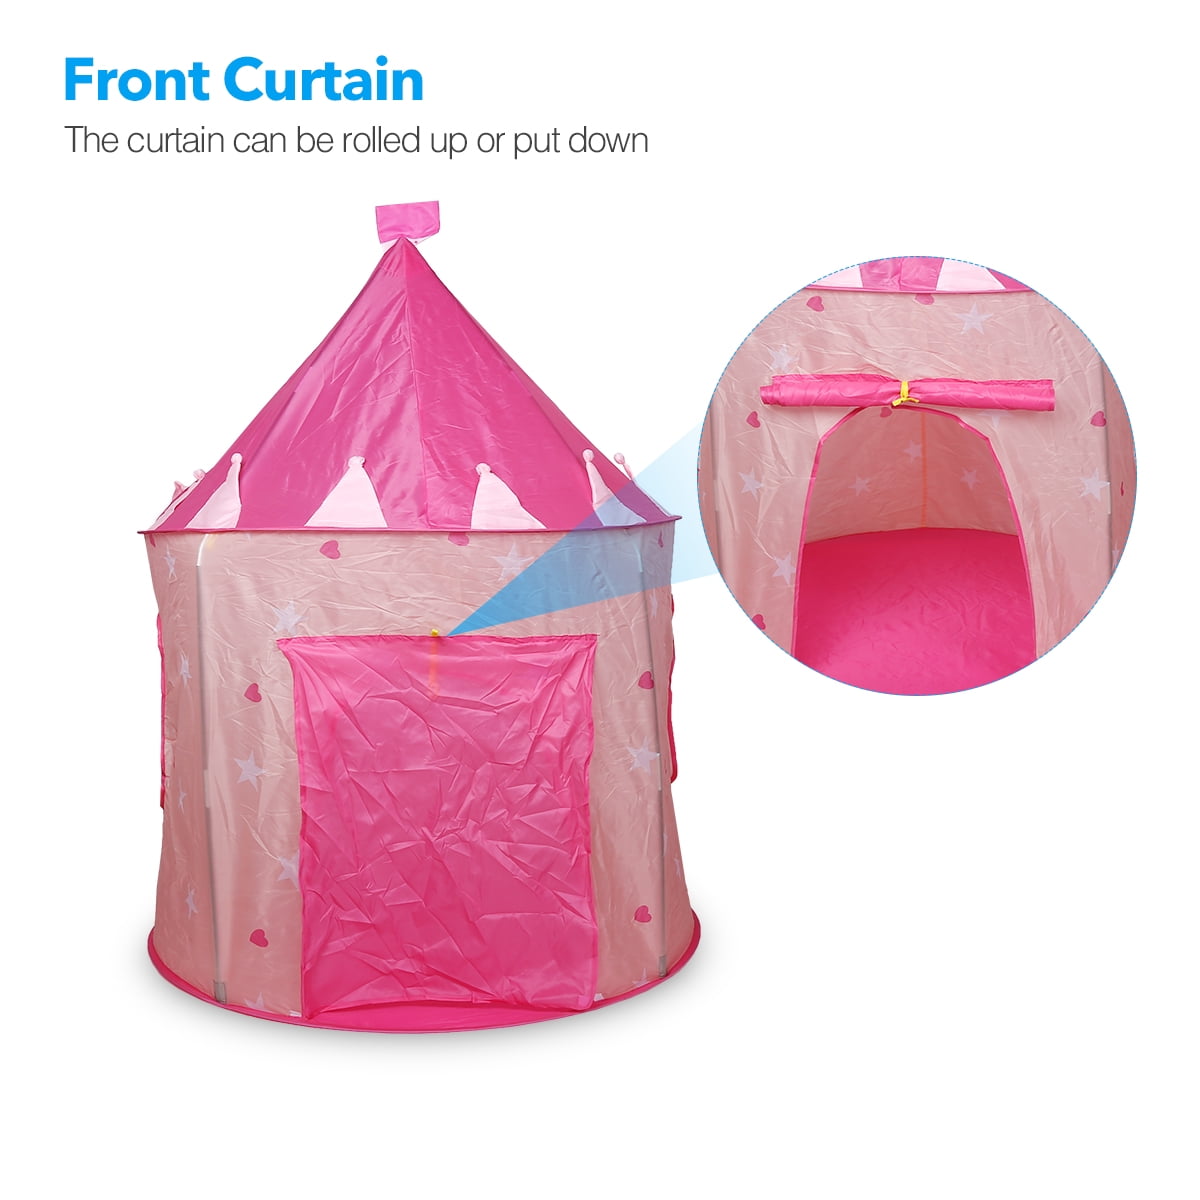 IDEAL GIFT Girls PINK Kids PRINCESS PALACE Pop Up Castle Play Tent 